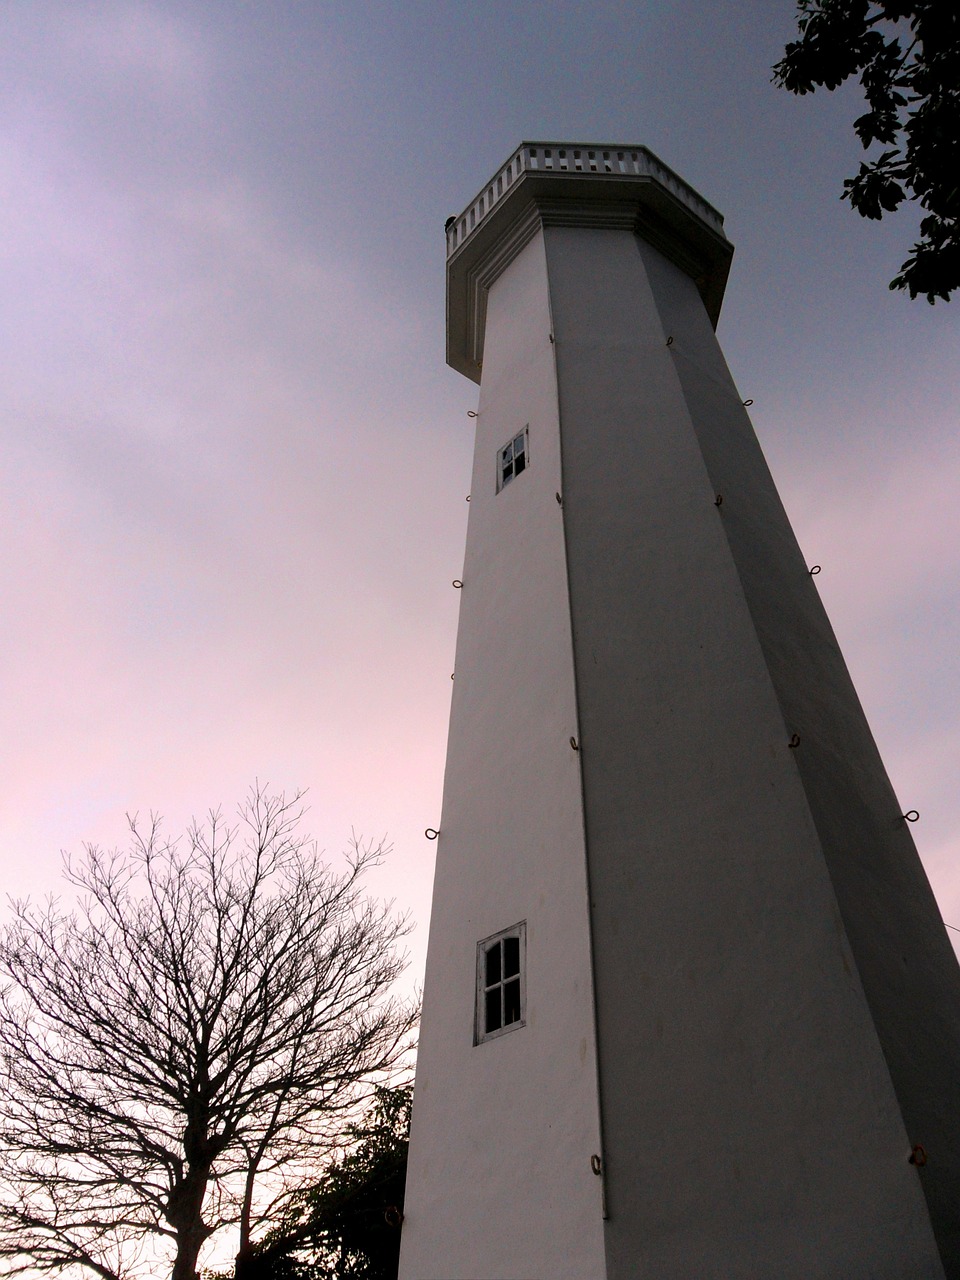 lighthouse old tower free photo